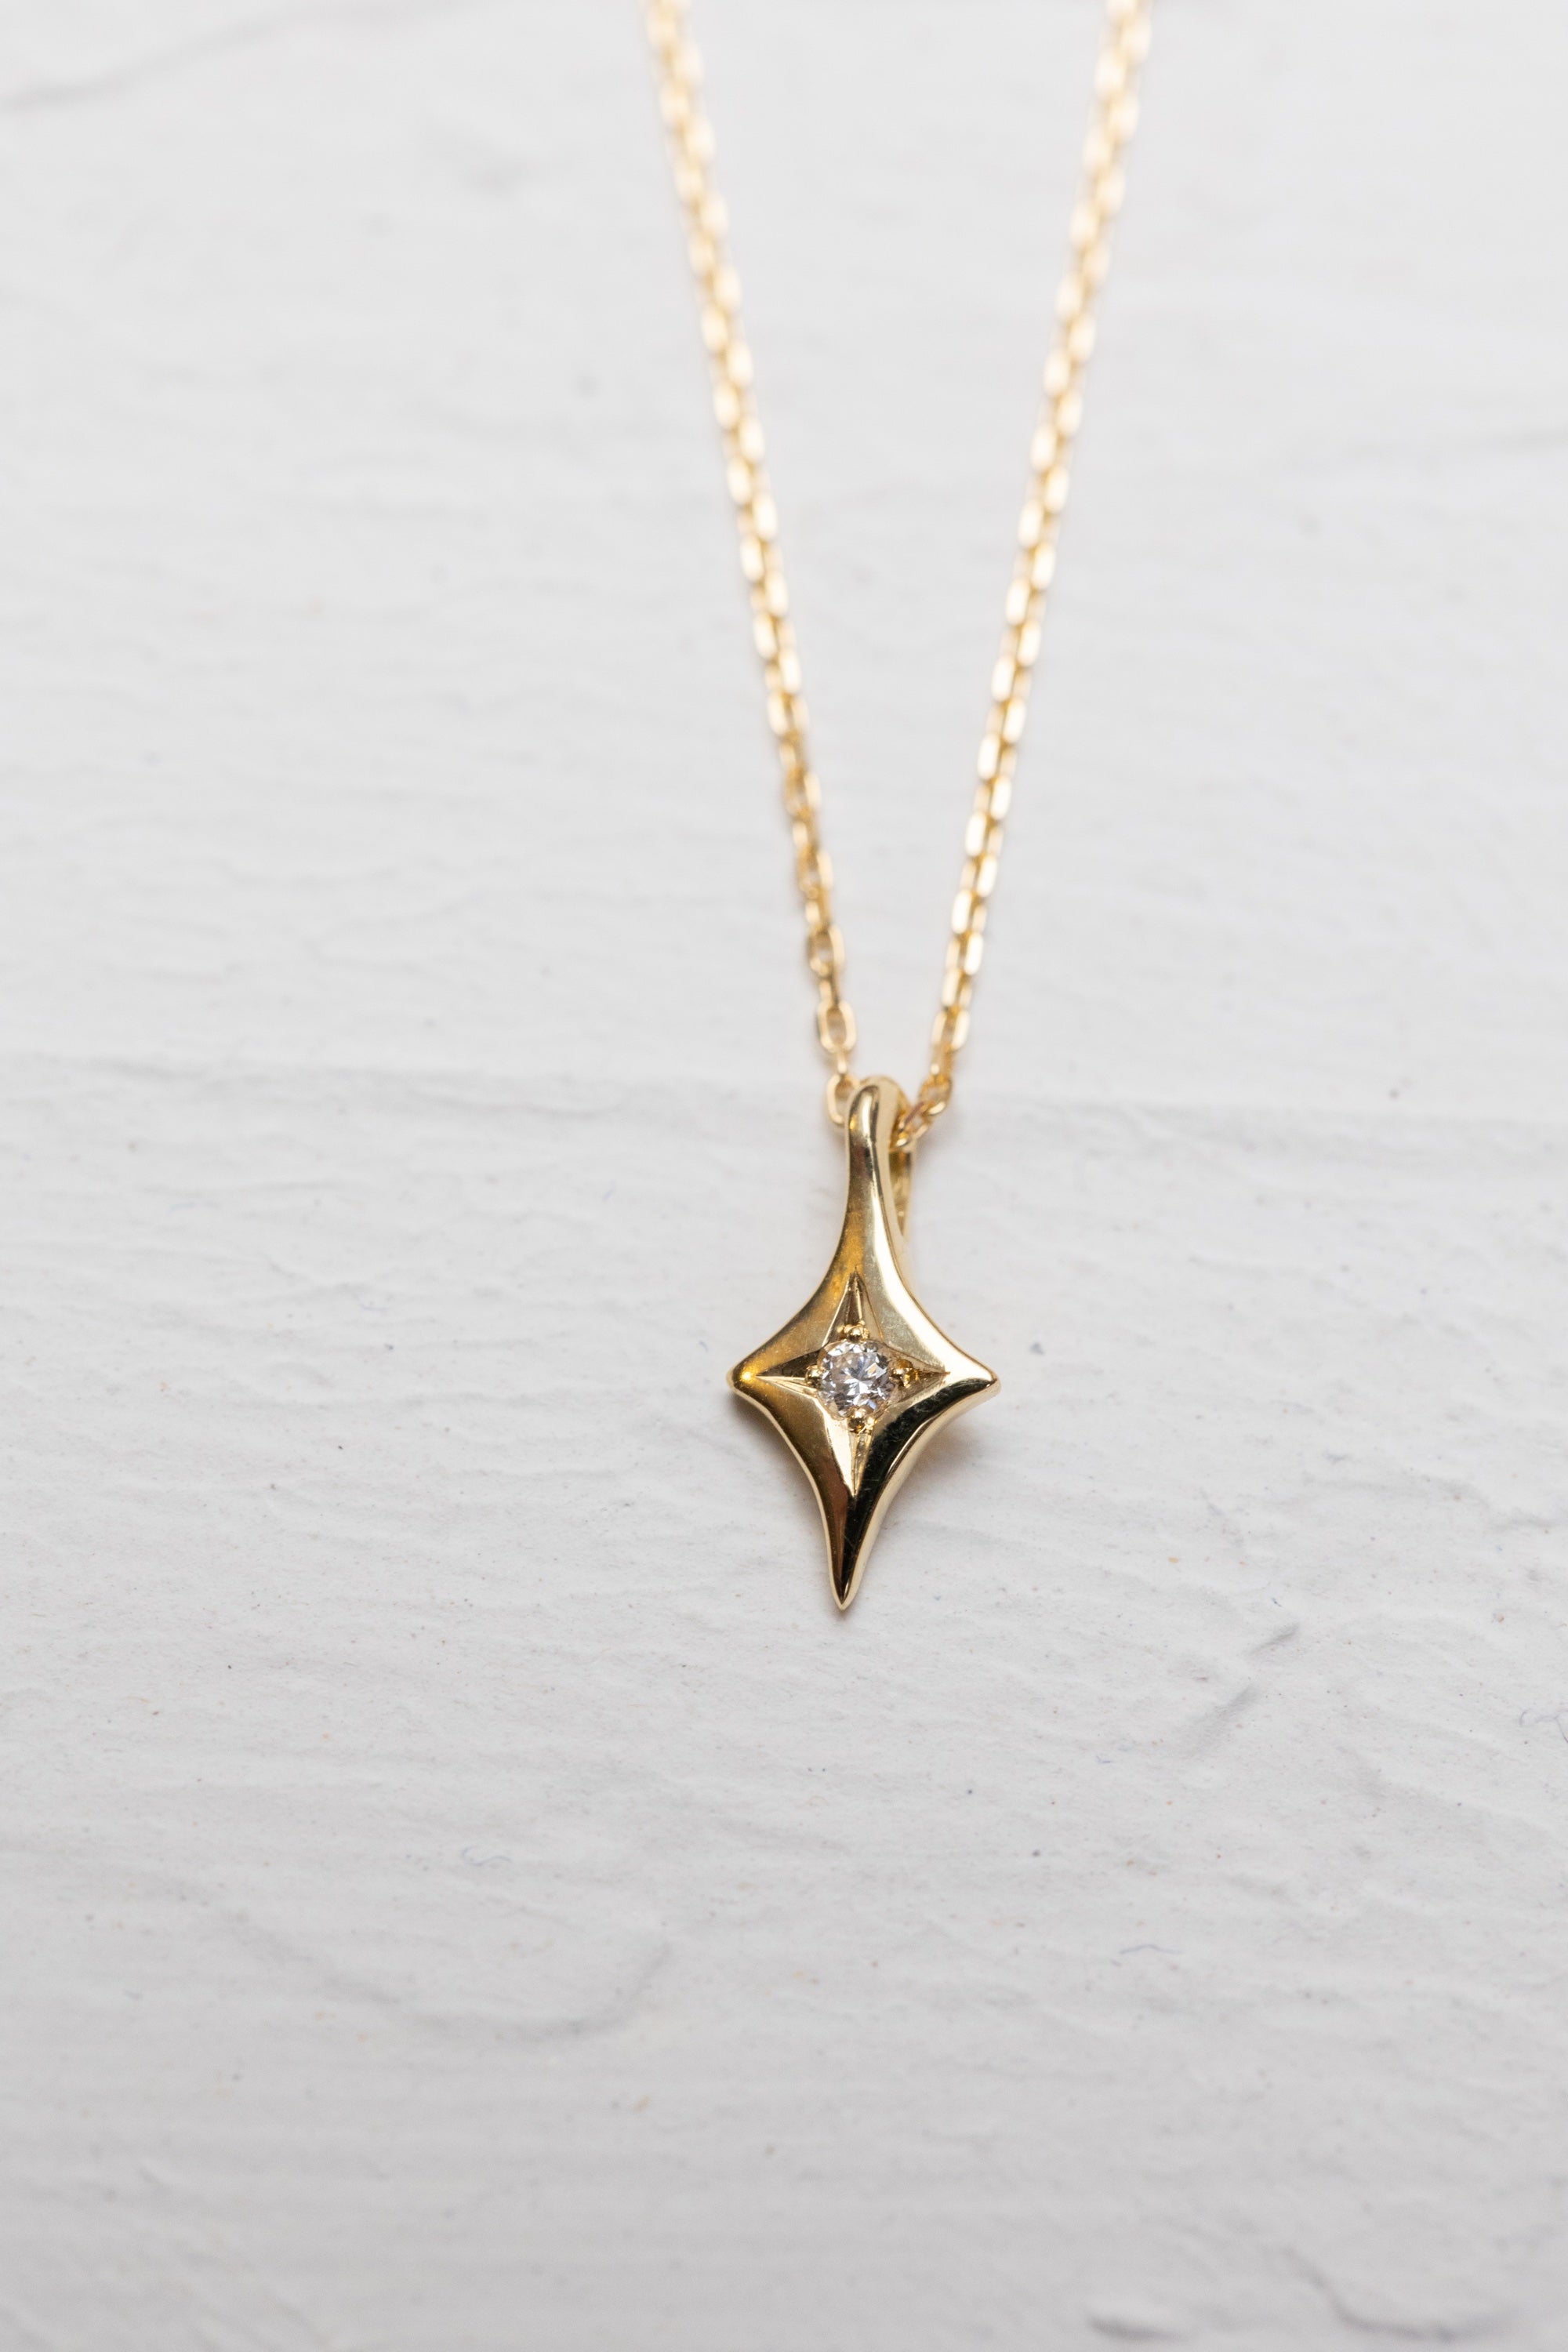 Four Pointed Star Necklace in Gold